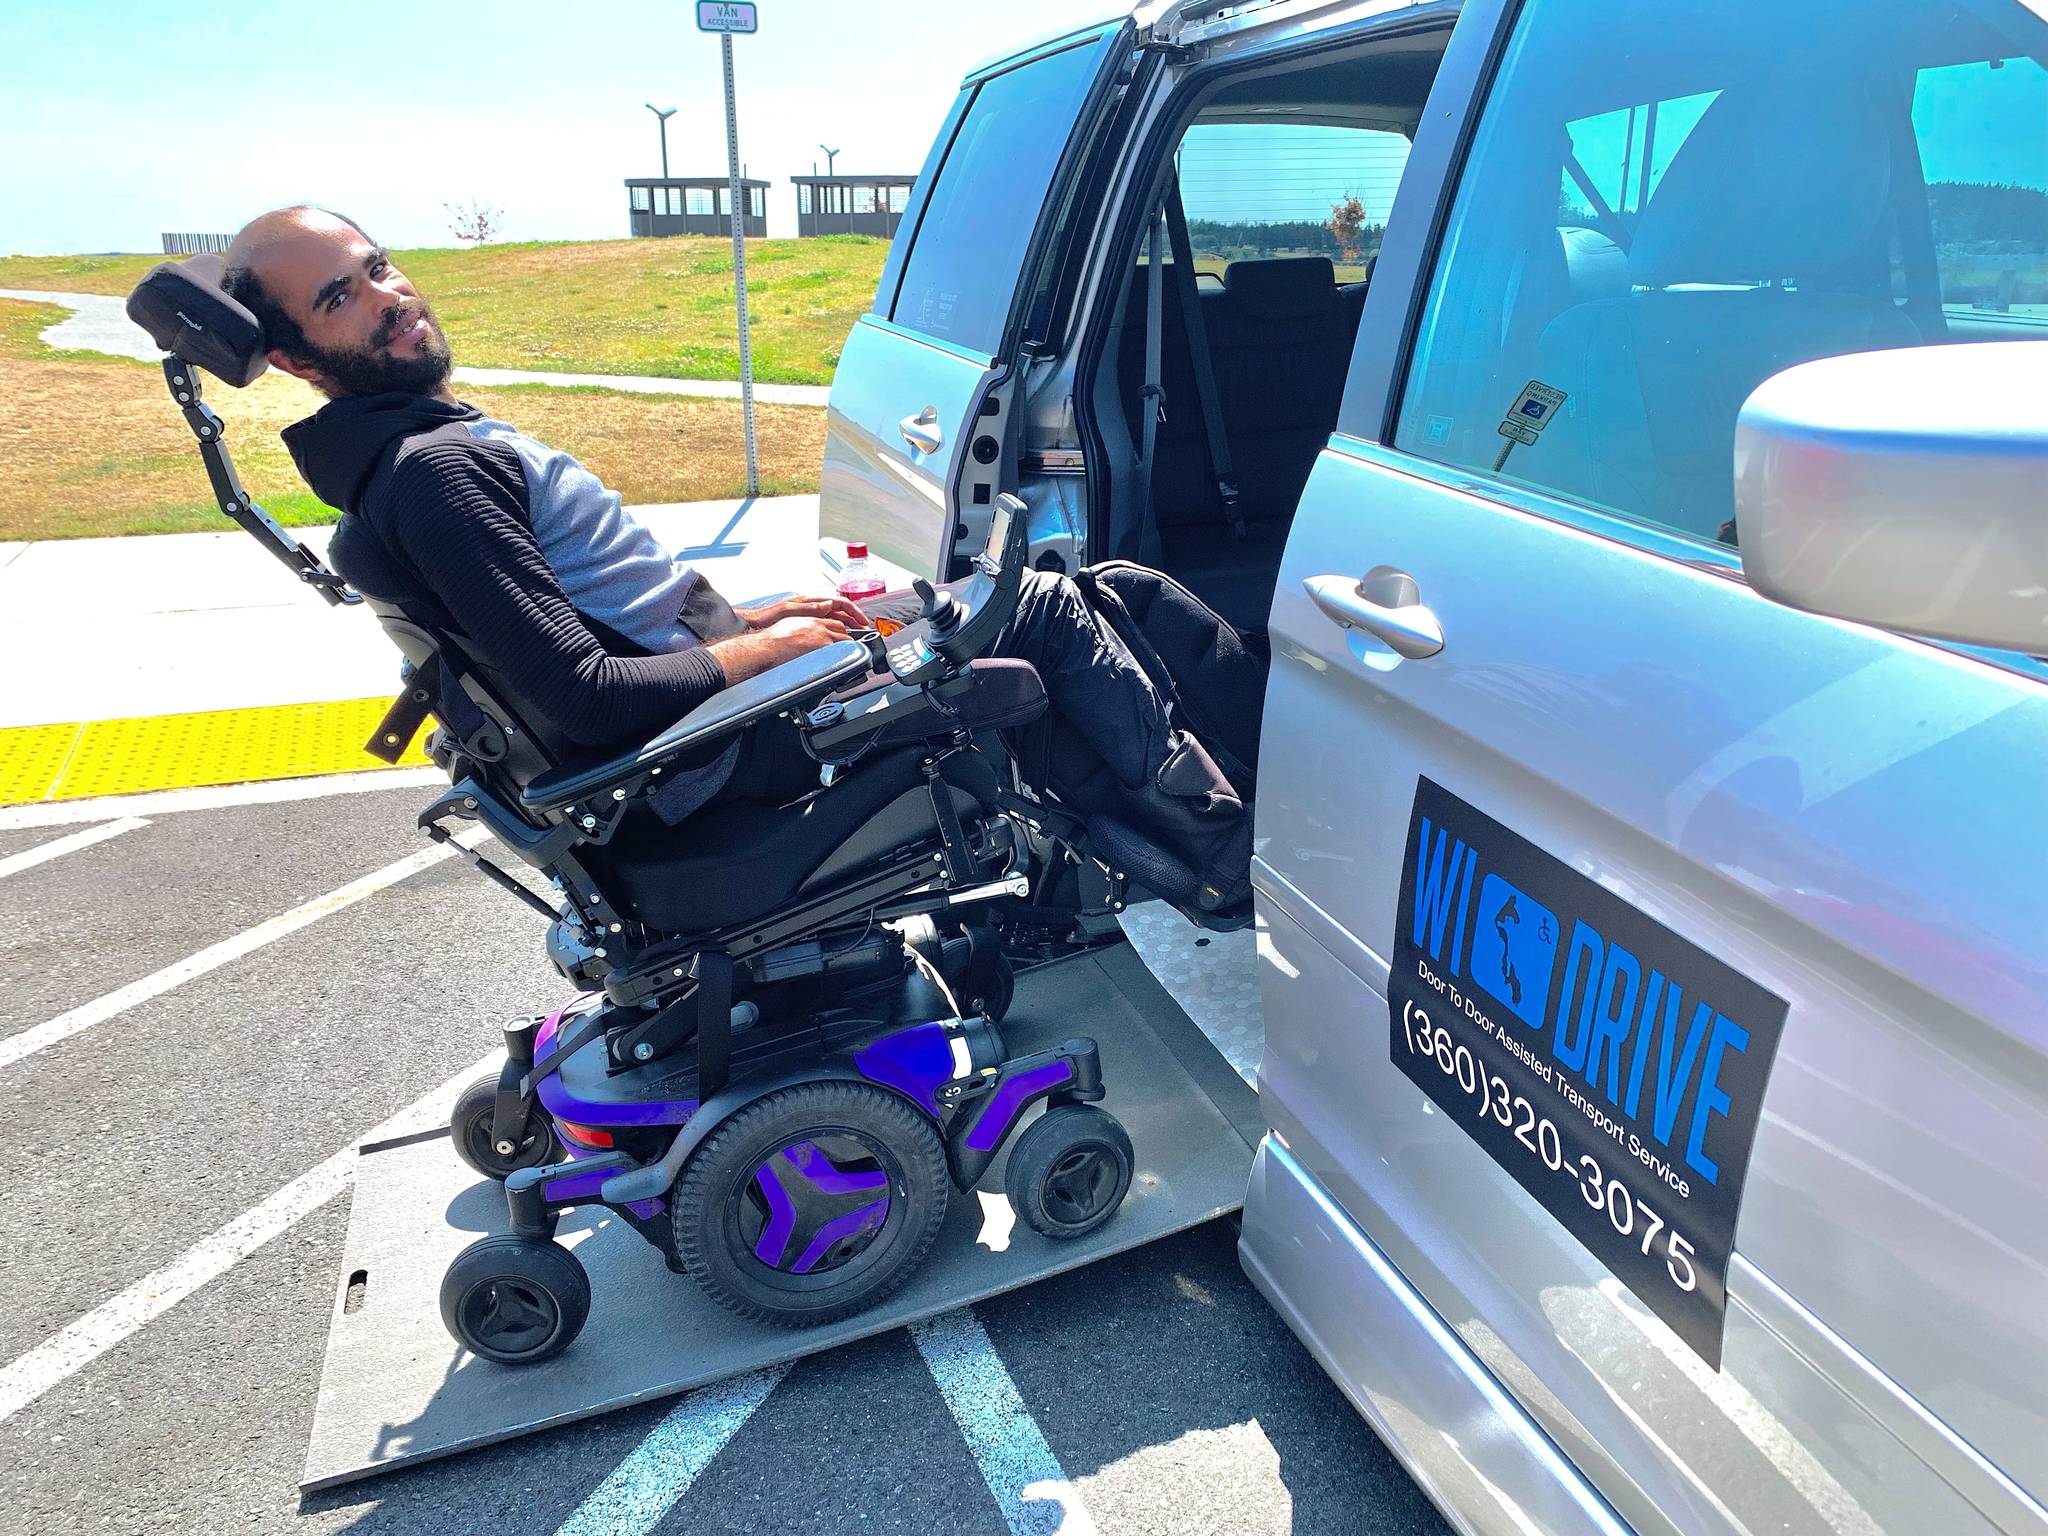 Photo by Heather Mayhugh
Stuart Peeples demonstrates how to enter Heather Mayhugh's wheelchair van. In recent months, while navigating the new Mukilteo ferry terminal, Mayhugh has struggled to unload her clients who need access to the restroom.